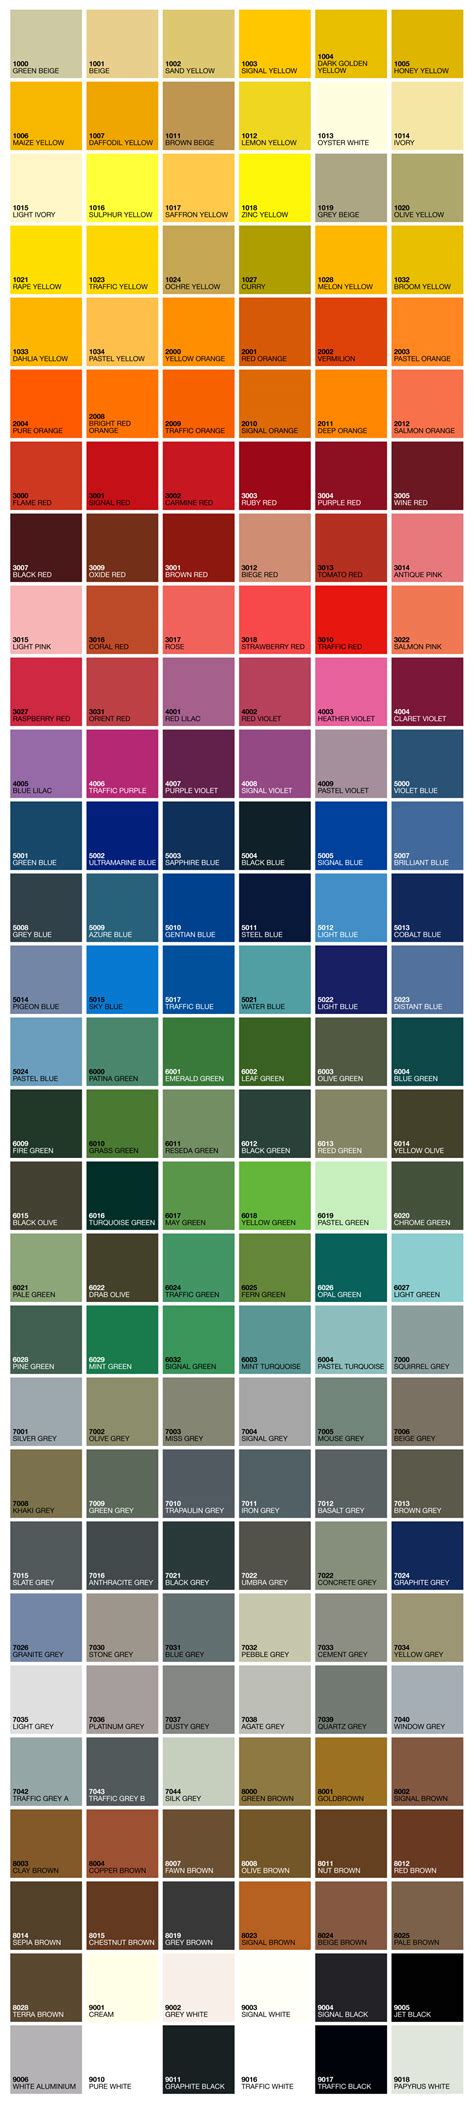 Ral Color Chart Paint Color Chart Ral Color Chart Ral Off